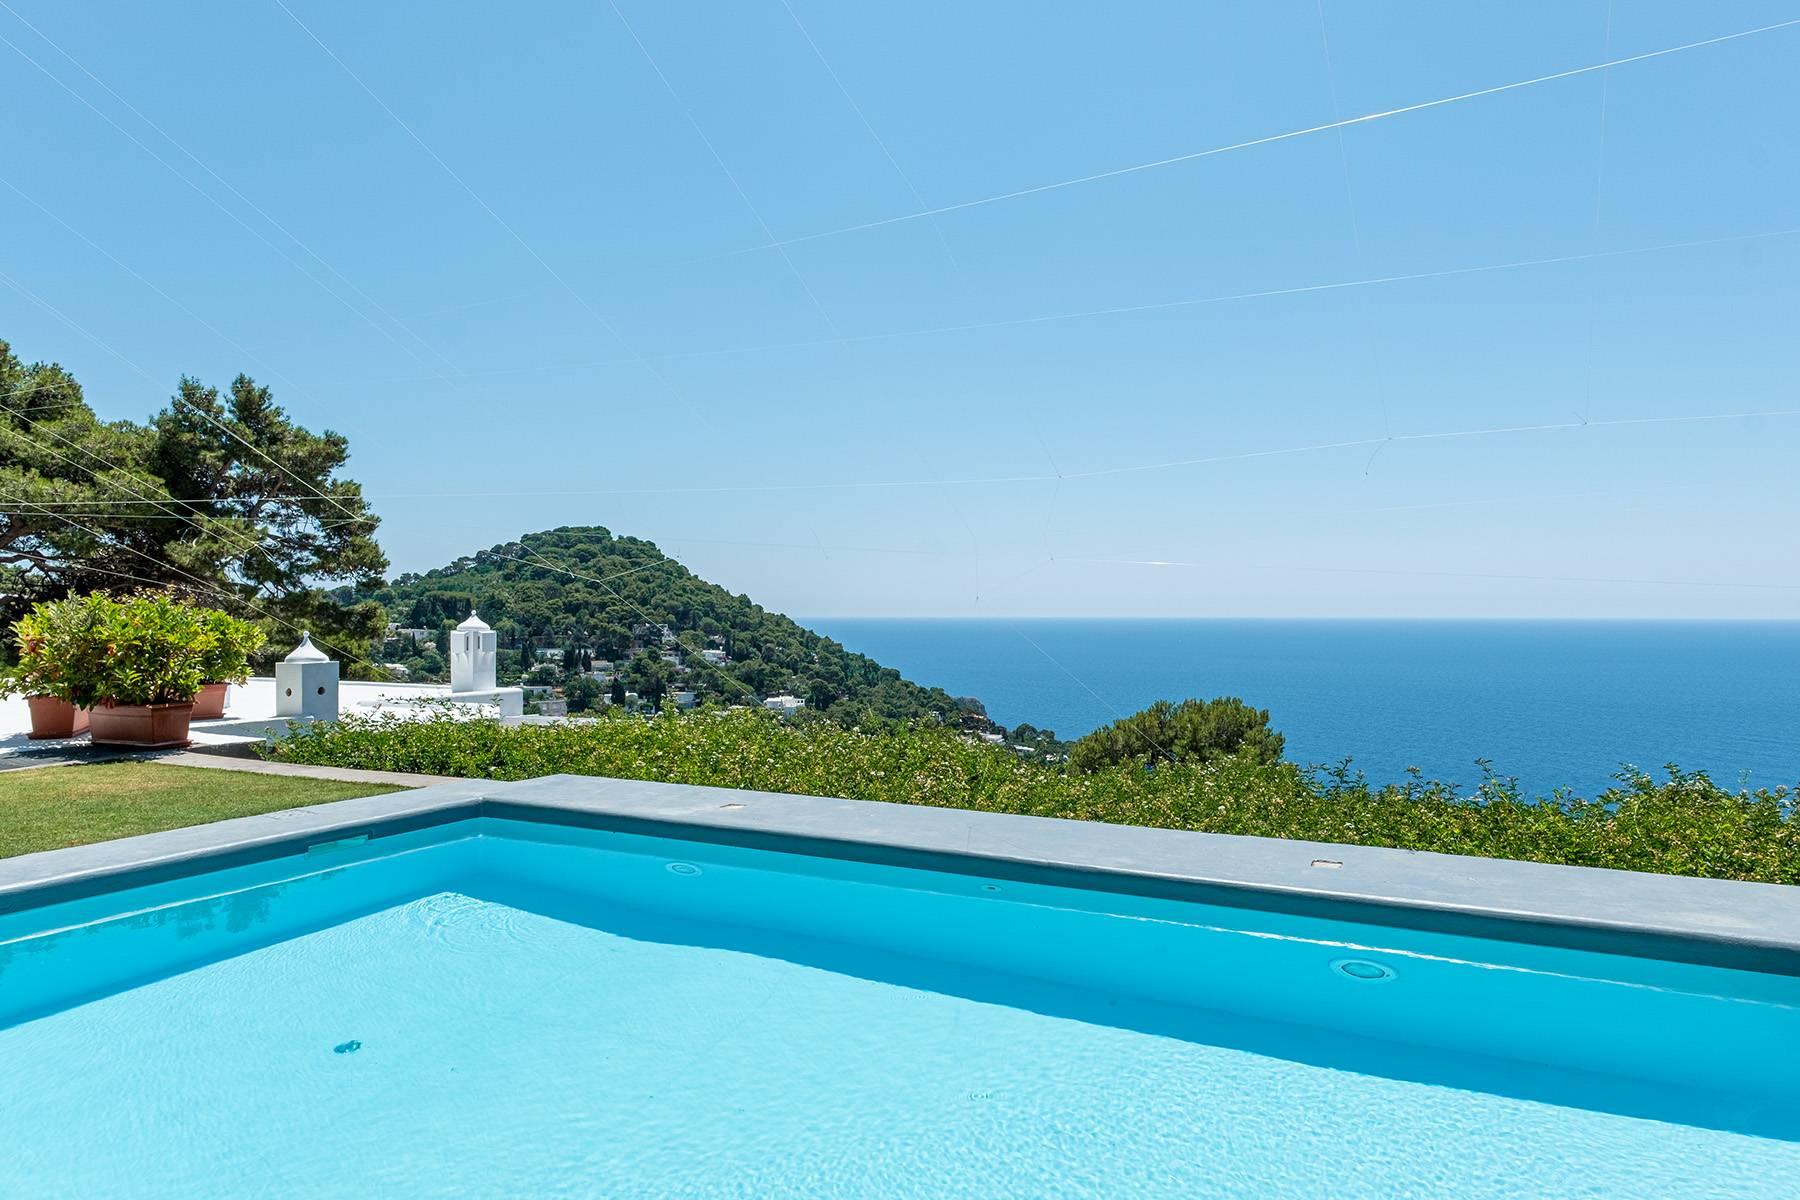 Stunning villa with swimming pool overlooking Capri and the sea - 29